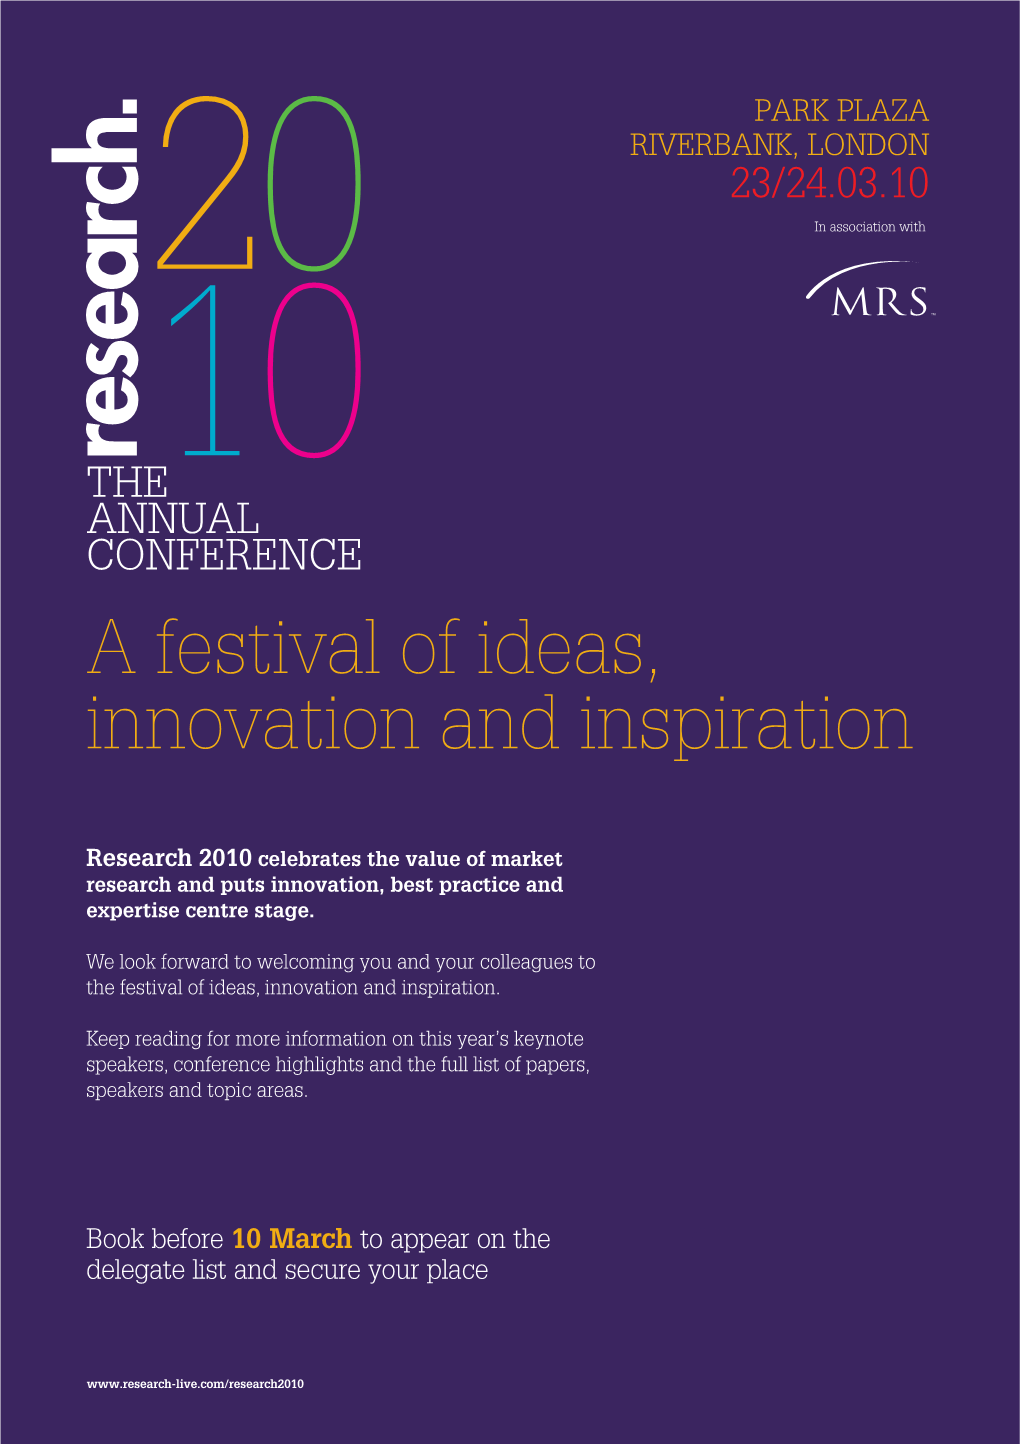 A Festival of Ideas, Innovation and Inspiration